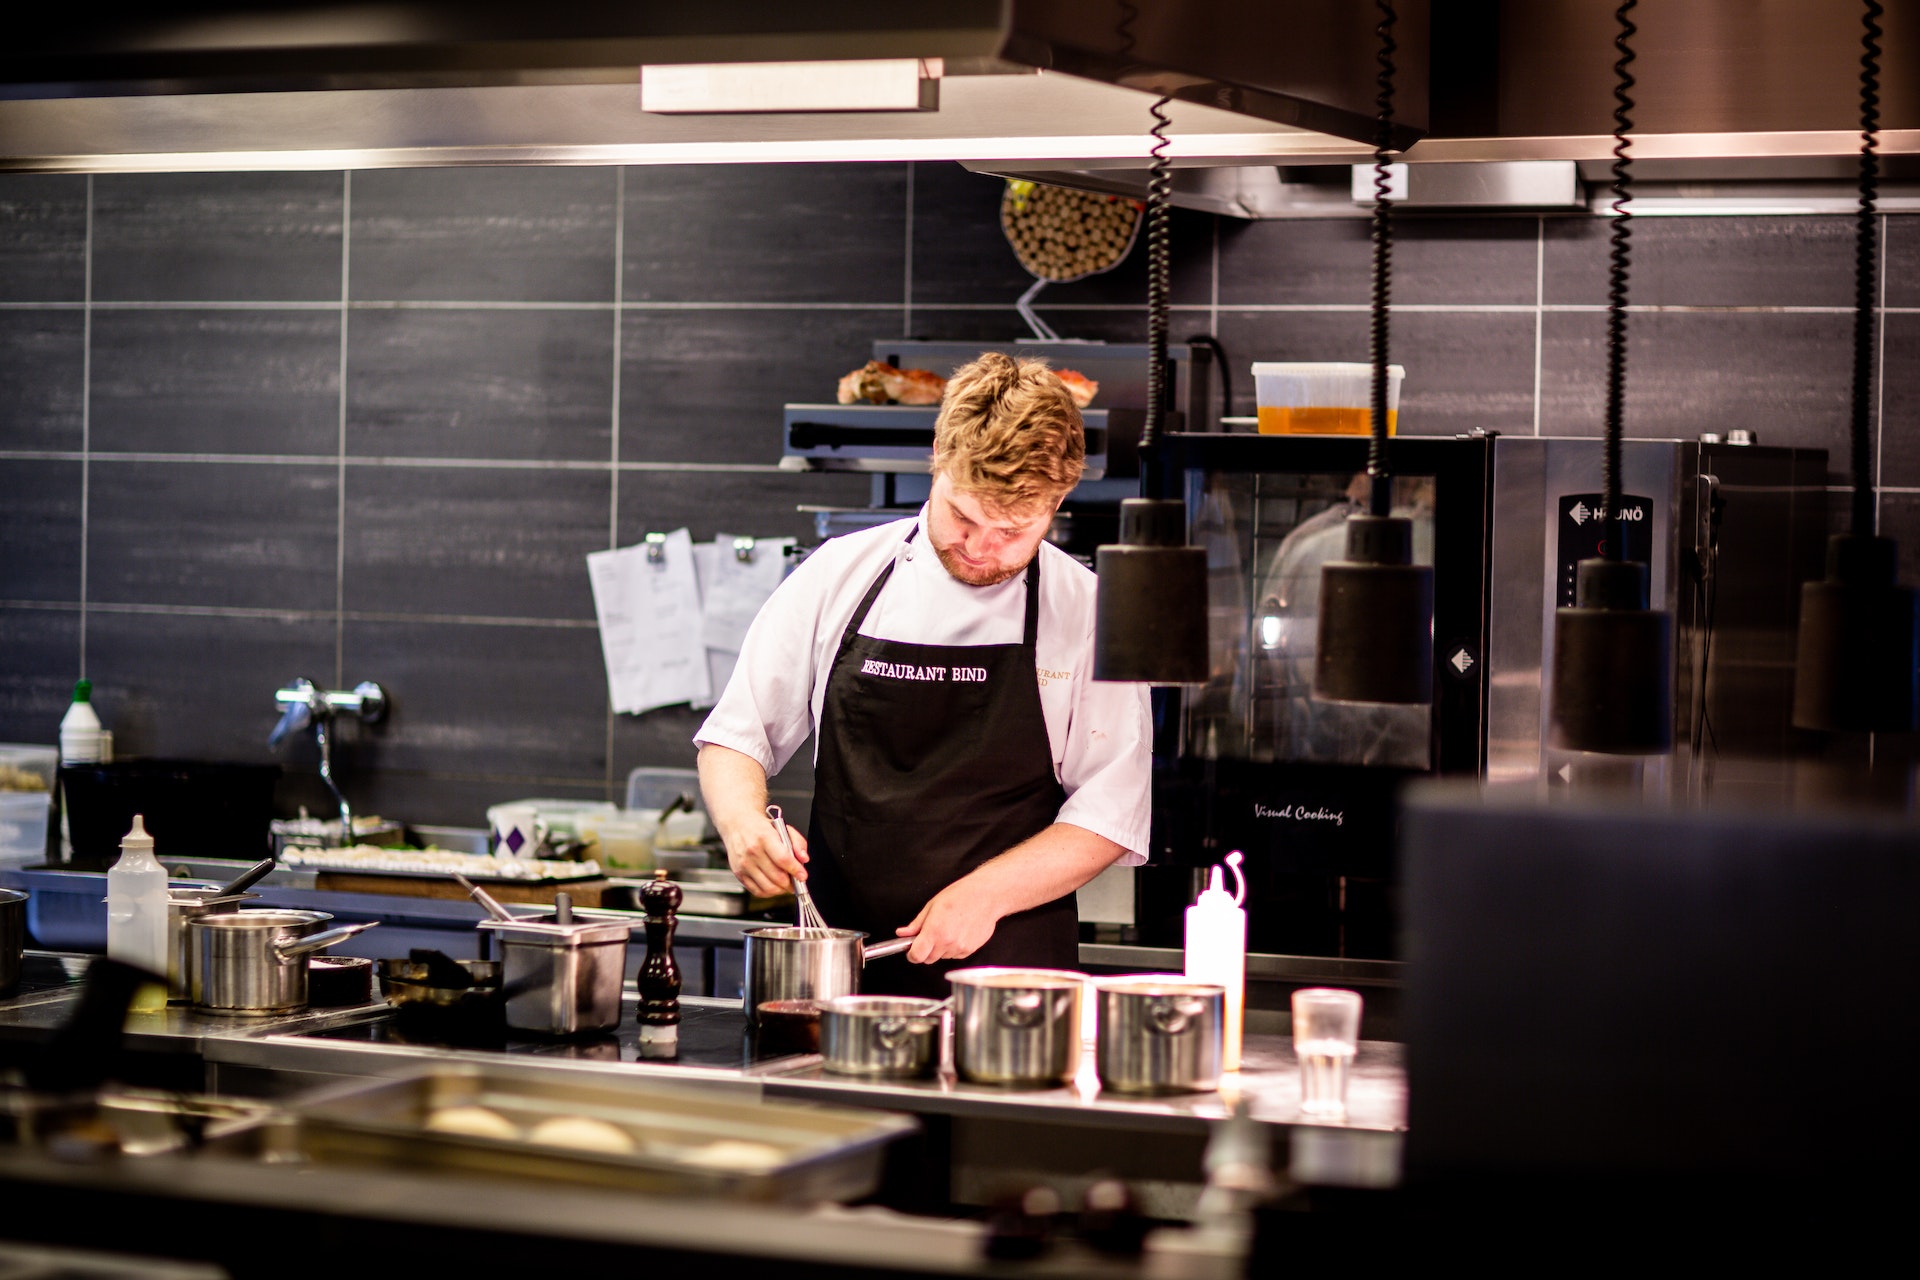 A cook working in a restaurant kitchen | Source: Pexels